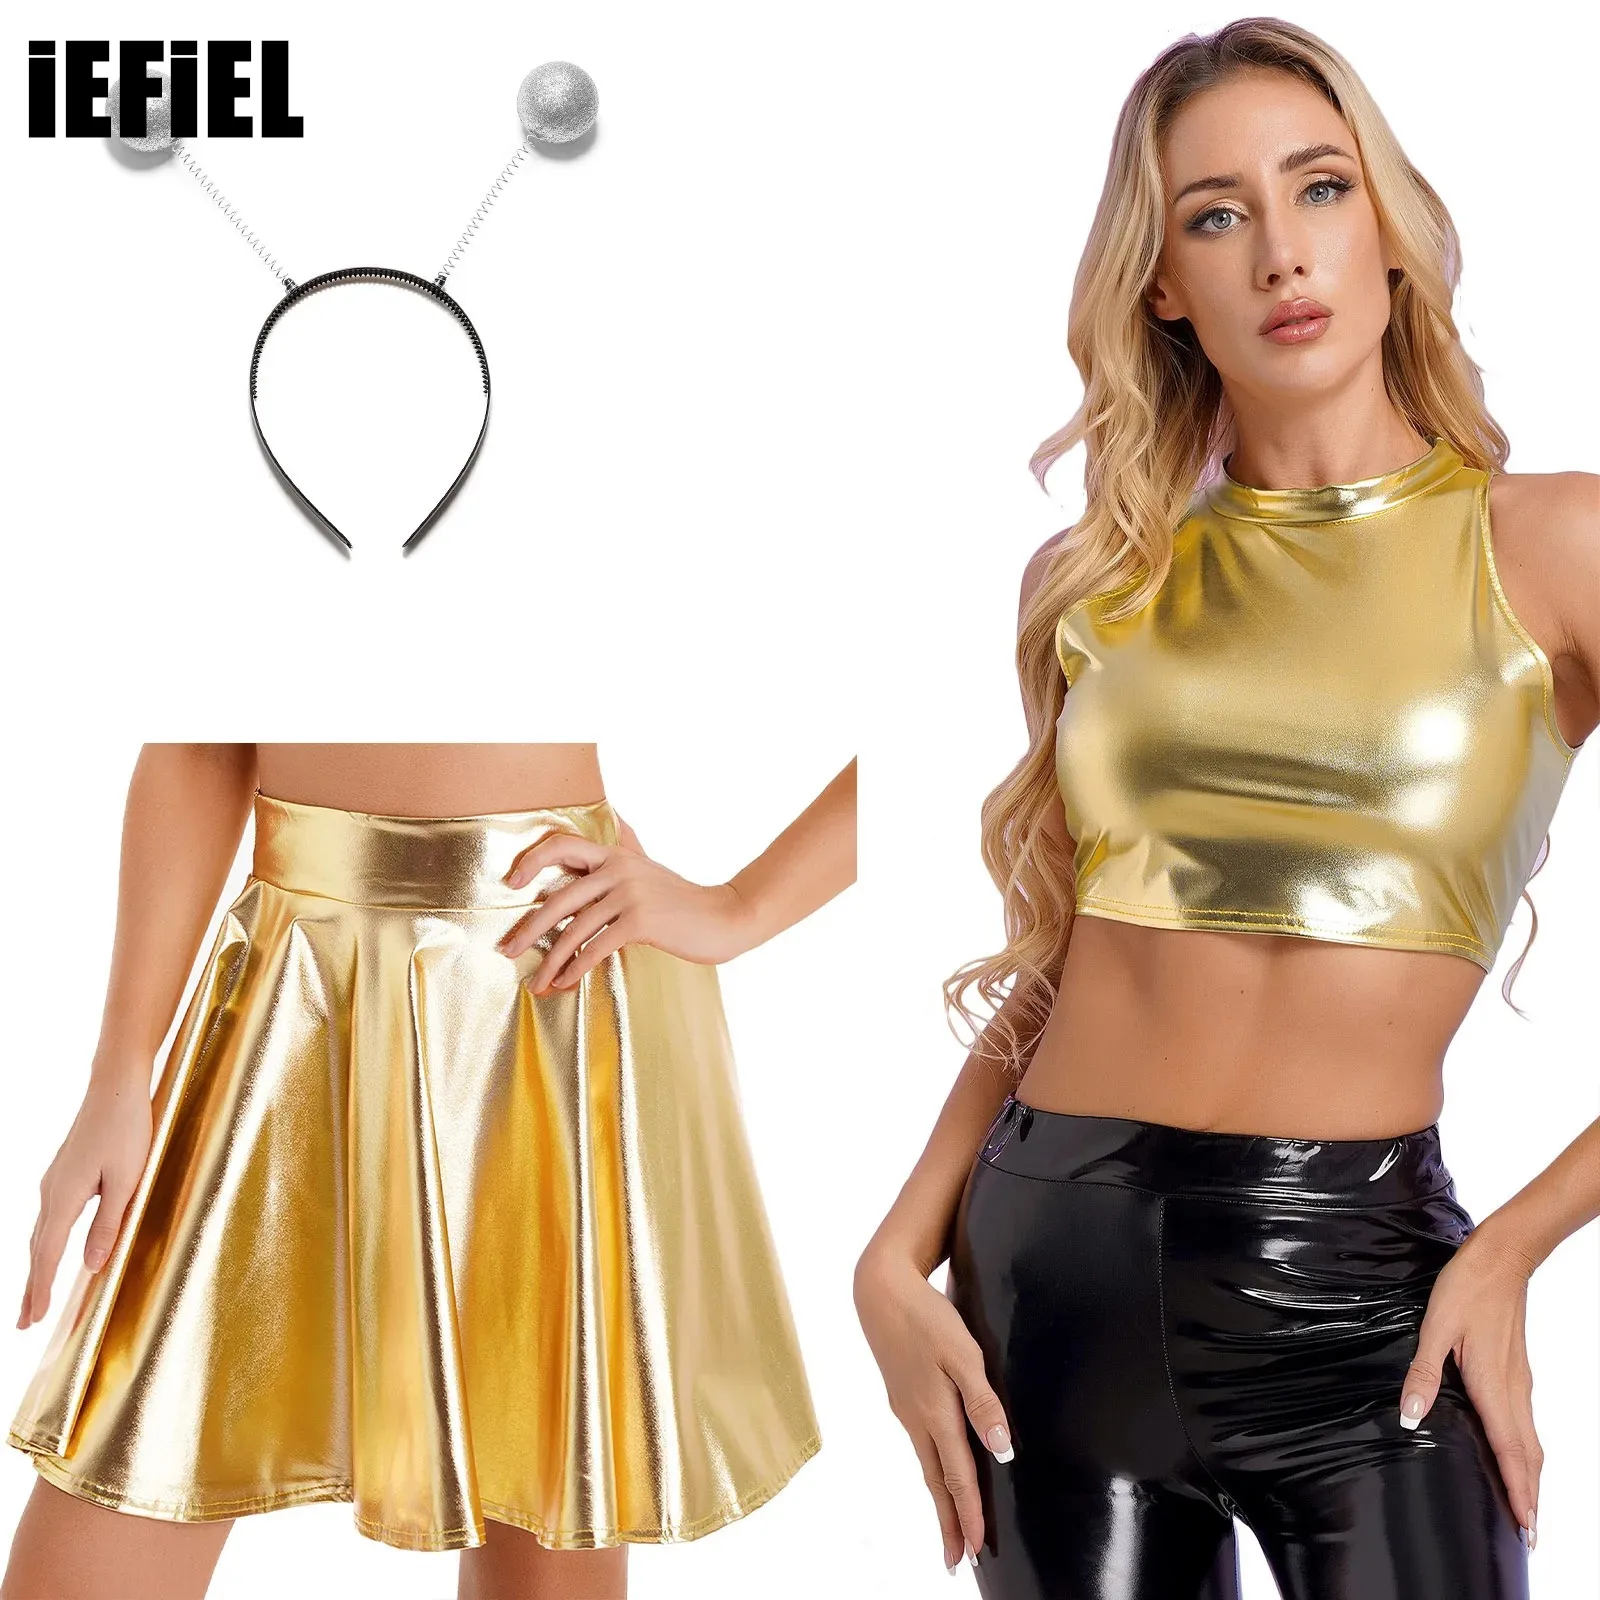 

Womens Alien Role Play Costume Outfit Shiny Metallic Mock Neck Crop Top with High Waist Flare Skirt And Hair Hoop Headband